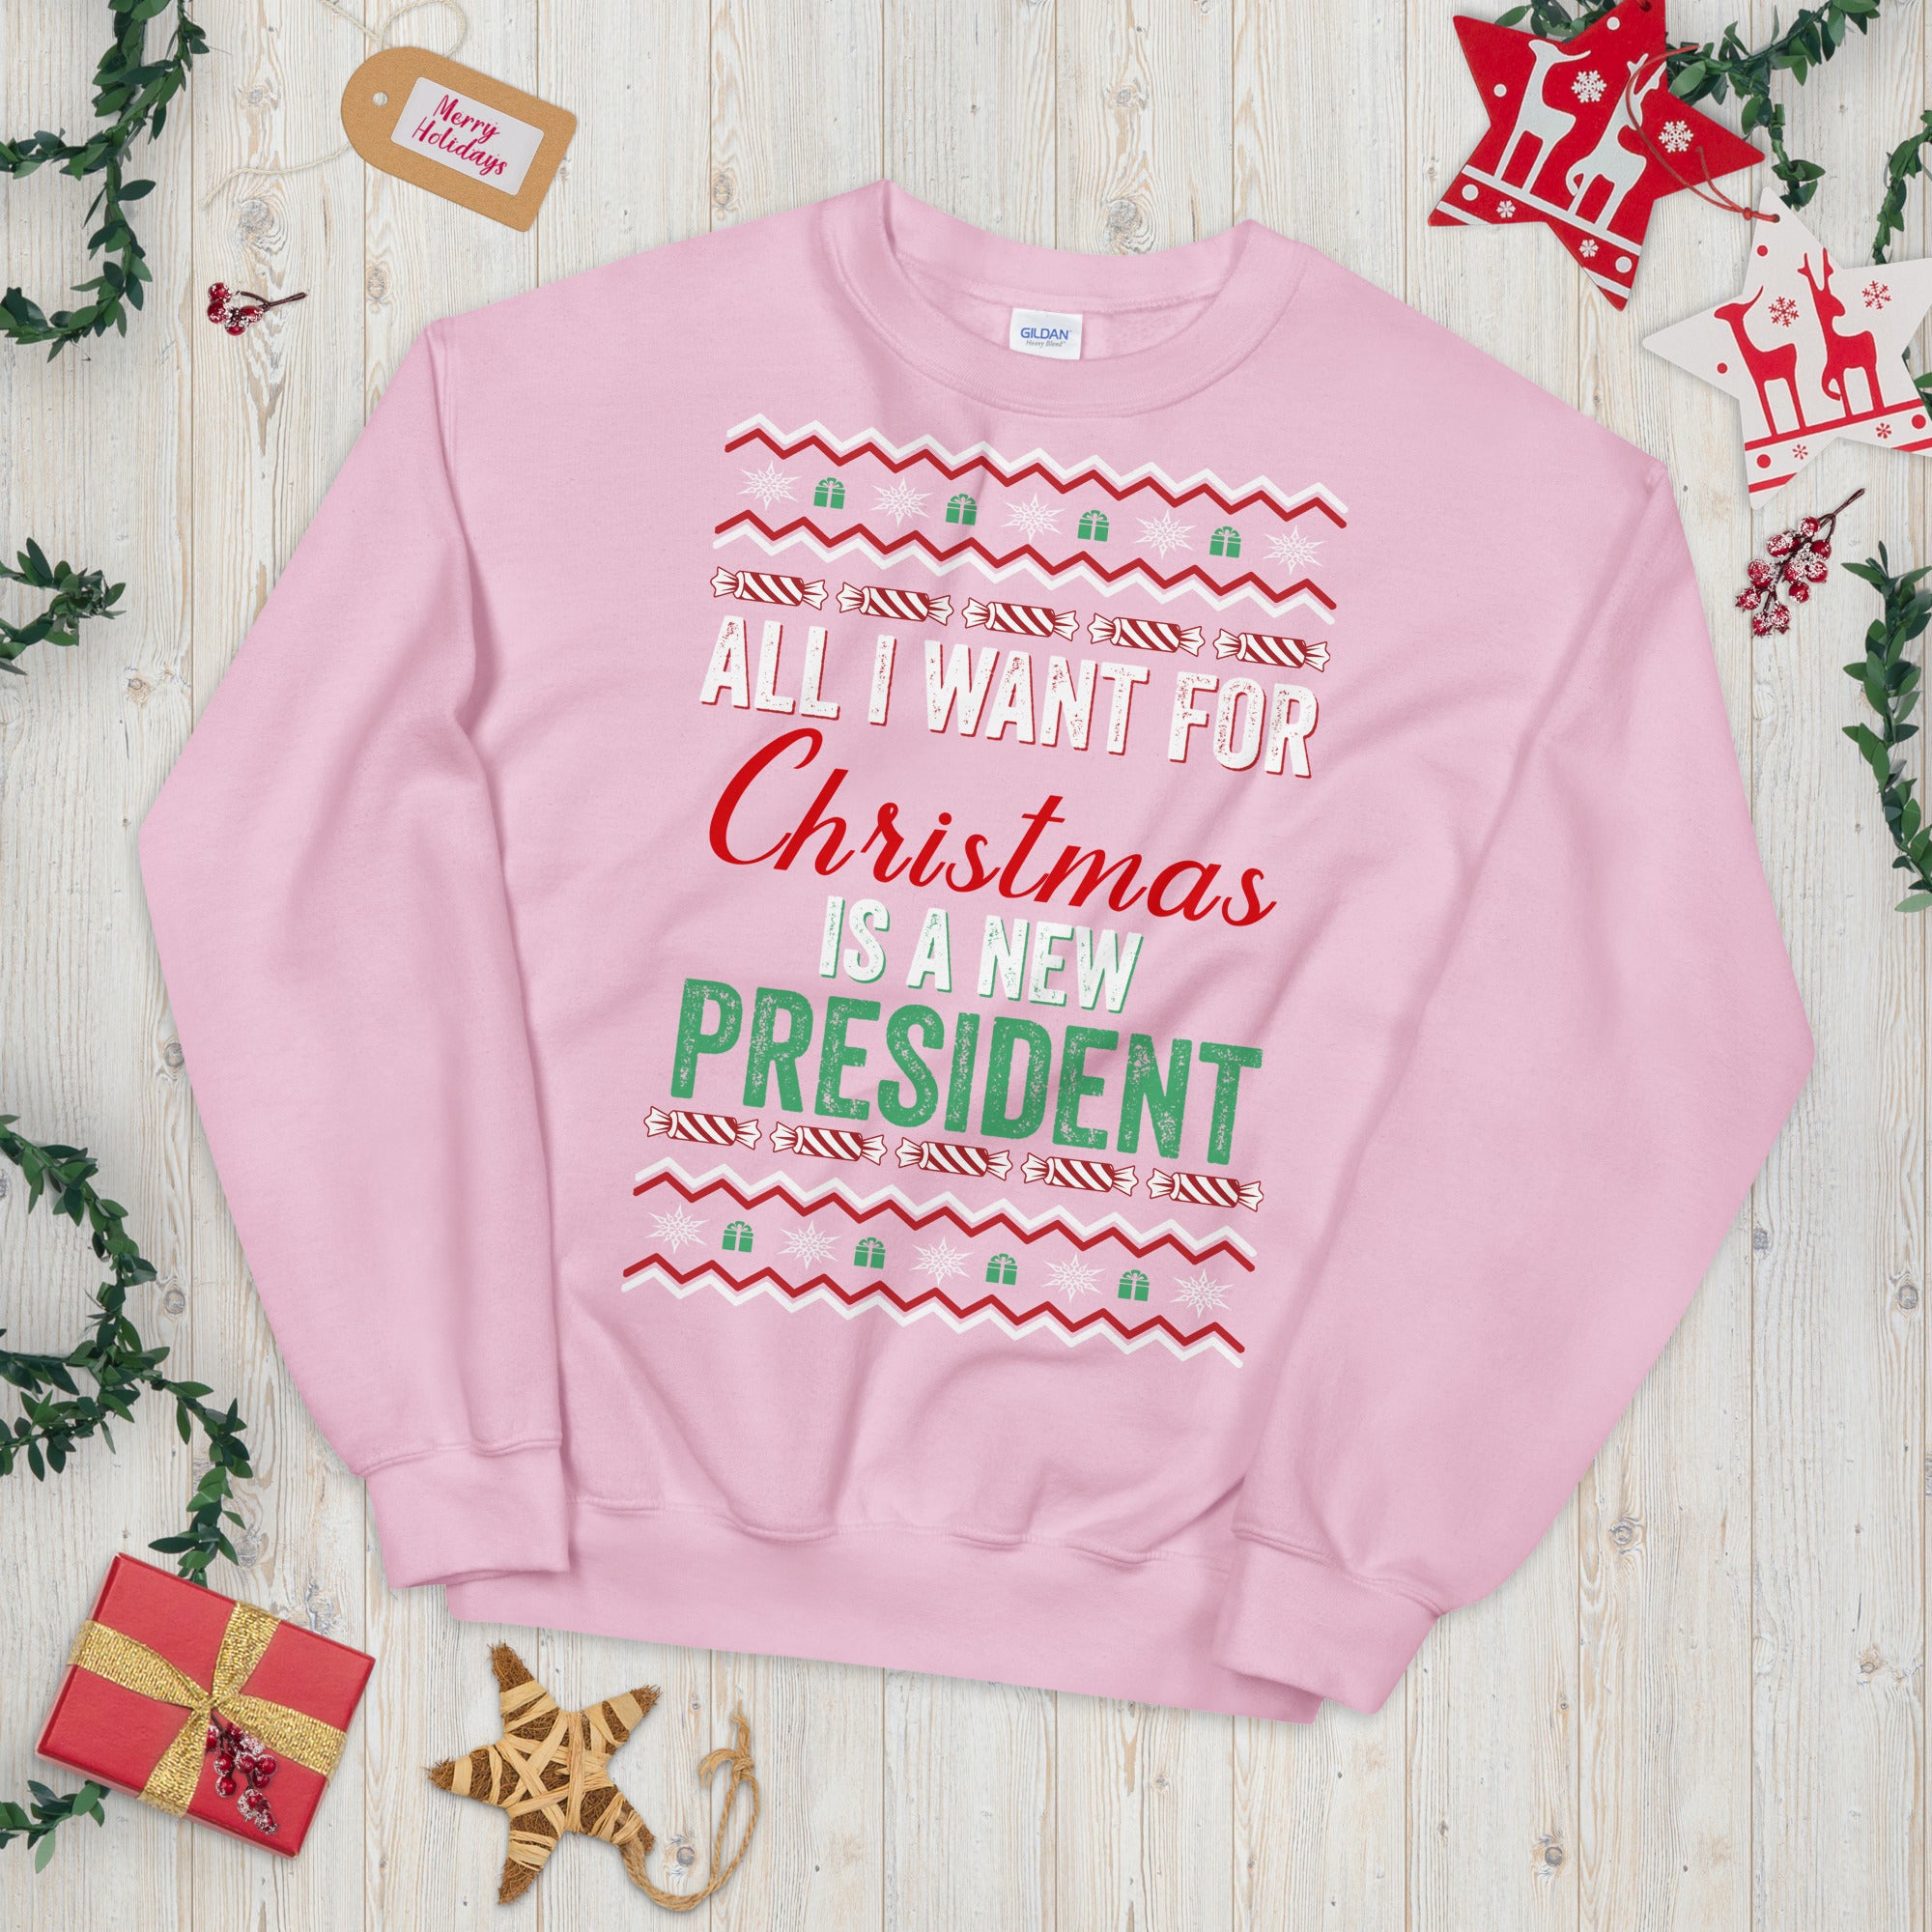 All I Want For Christmas Is A New President, FJB Christmas Sweatshirt, Anti Biden Christmas Sweatshirt, Conservative Sweatshirt, FJB Sweater - Madeinsea©